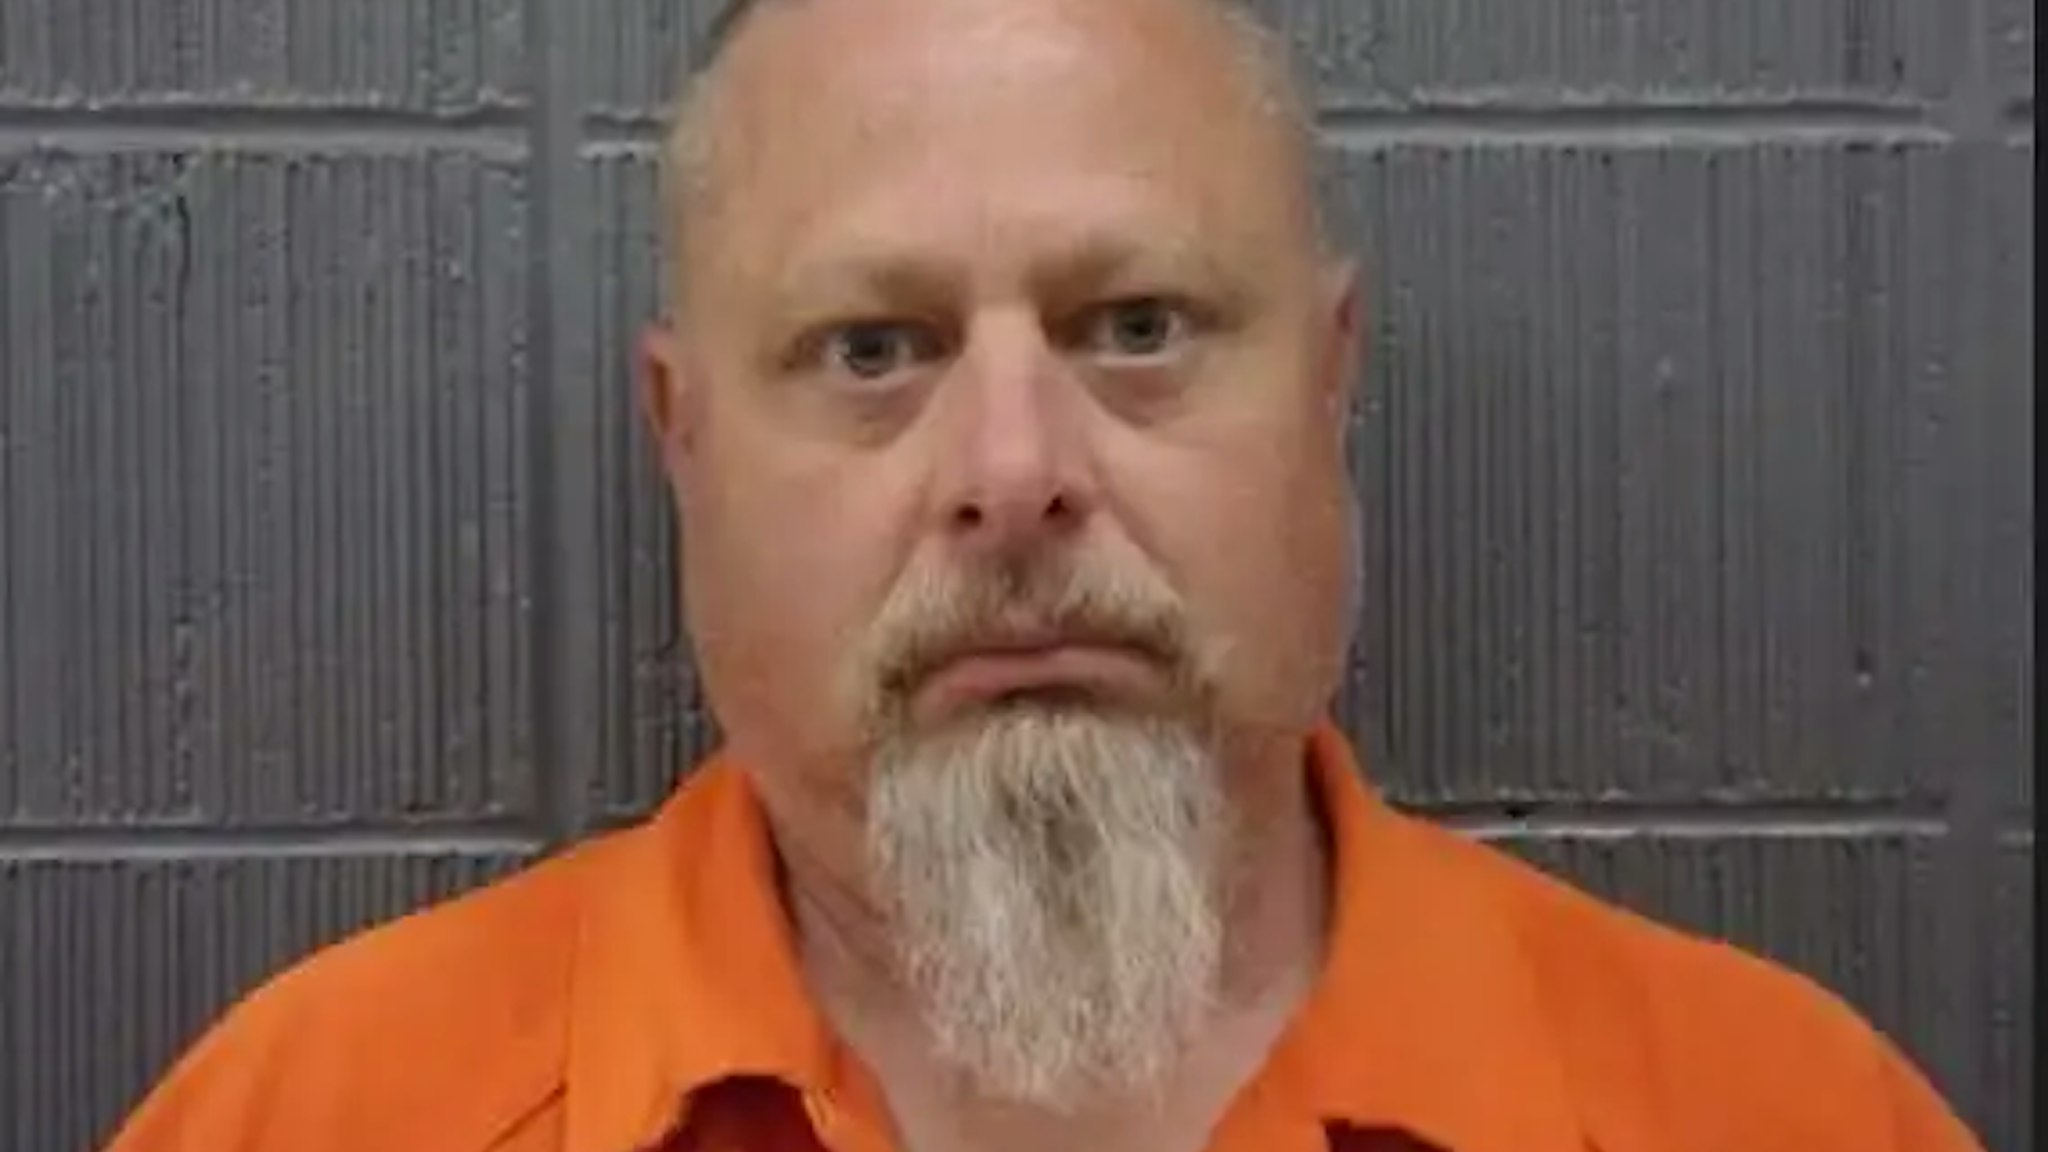 Richard Allen, 50, was arrested and charged in connection to the murders of two Delphi, Indiana, teenagers.